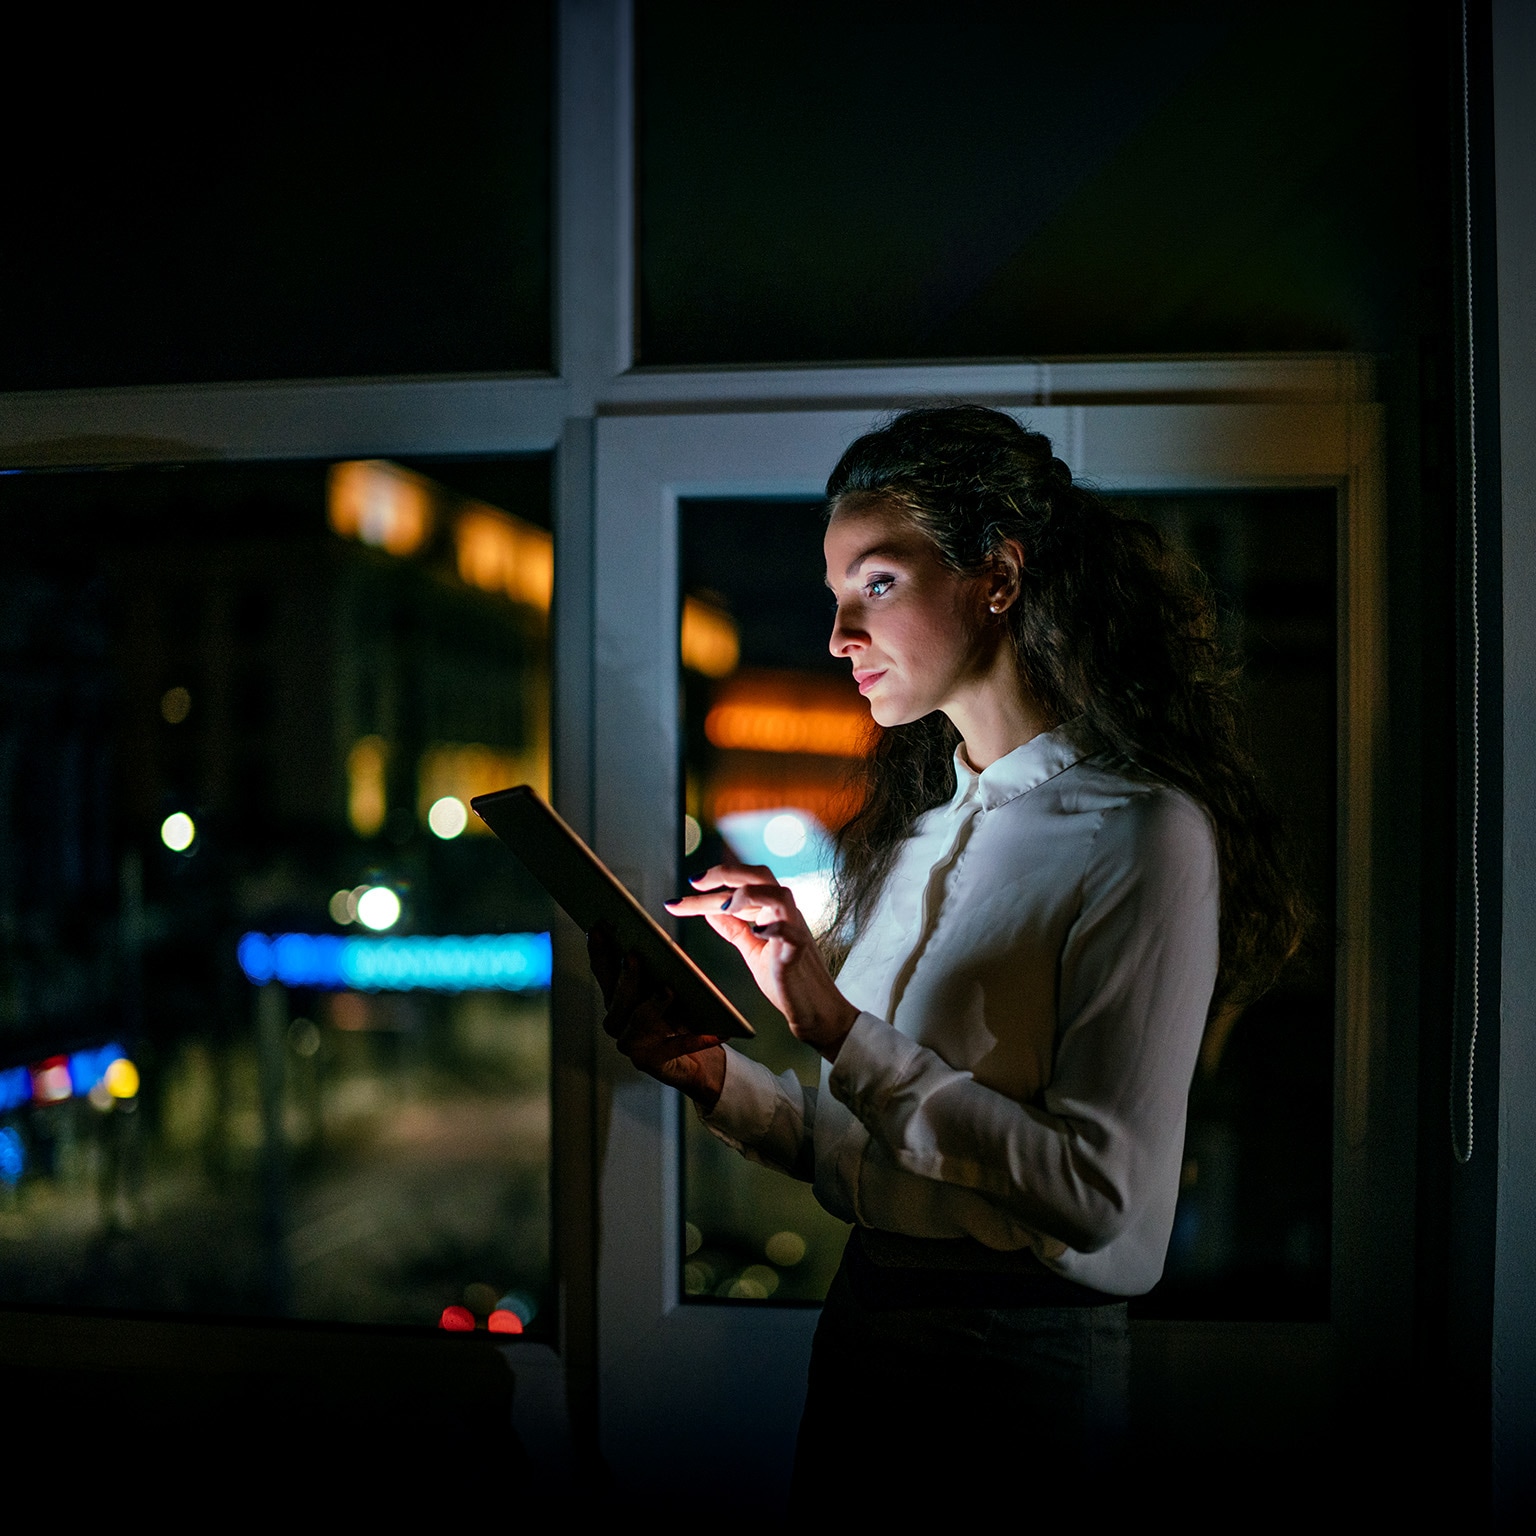 Image of a businesswoman working late on a digital tablet in an office.